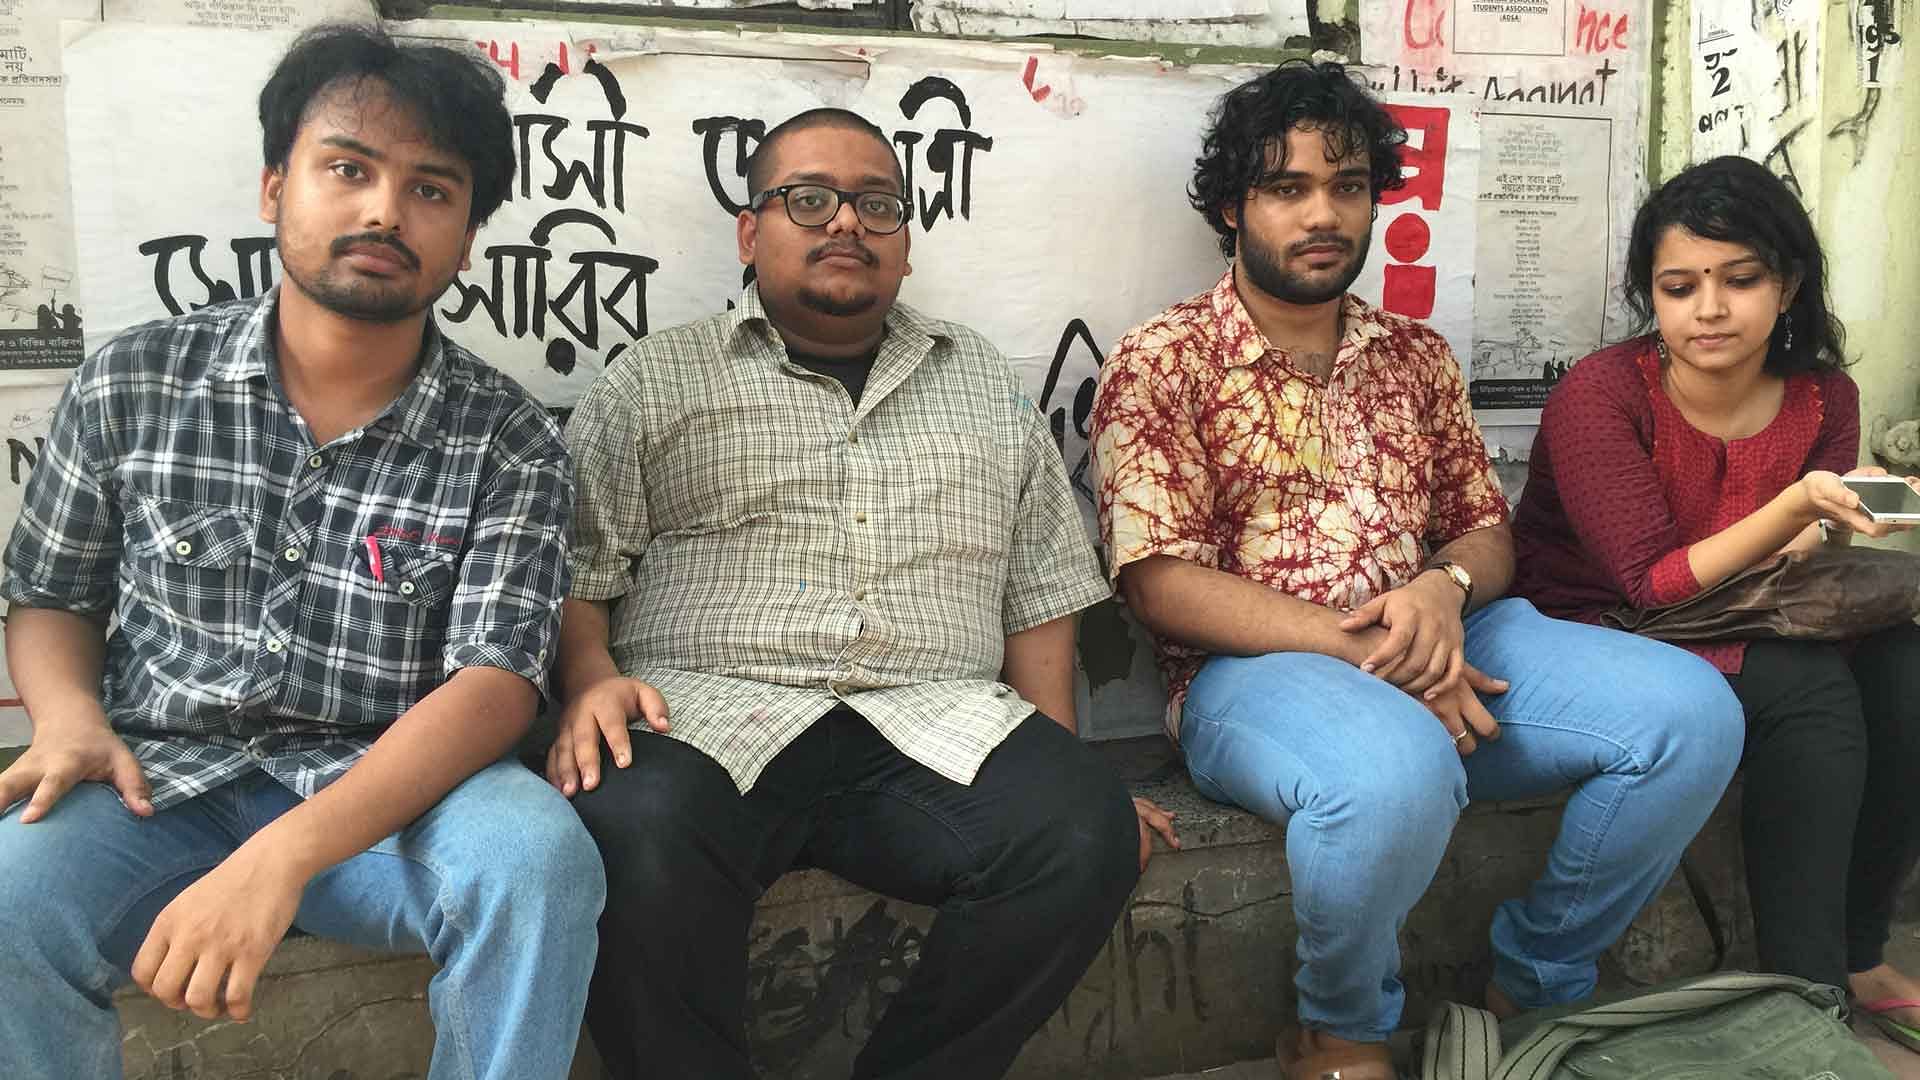 Students at Jadavpur University speak to <b>The Quint </b>on Assembly polls, caste issue, Kanhaiya Kumar and Rohith Vemula. (Photo: <b>The Quint</b>)